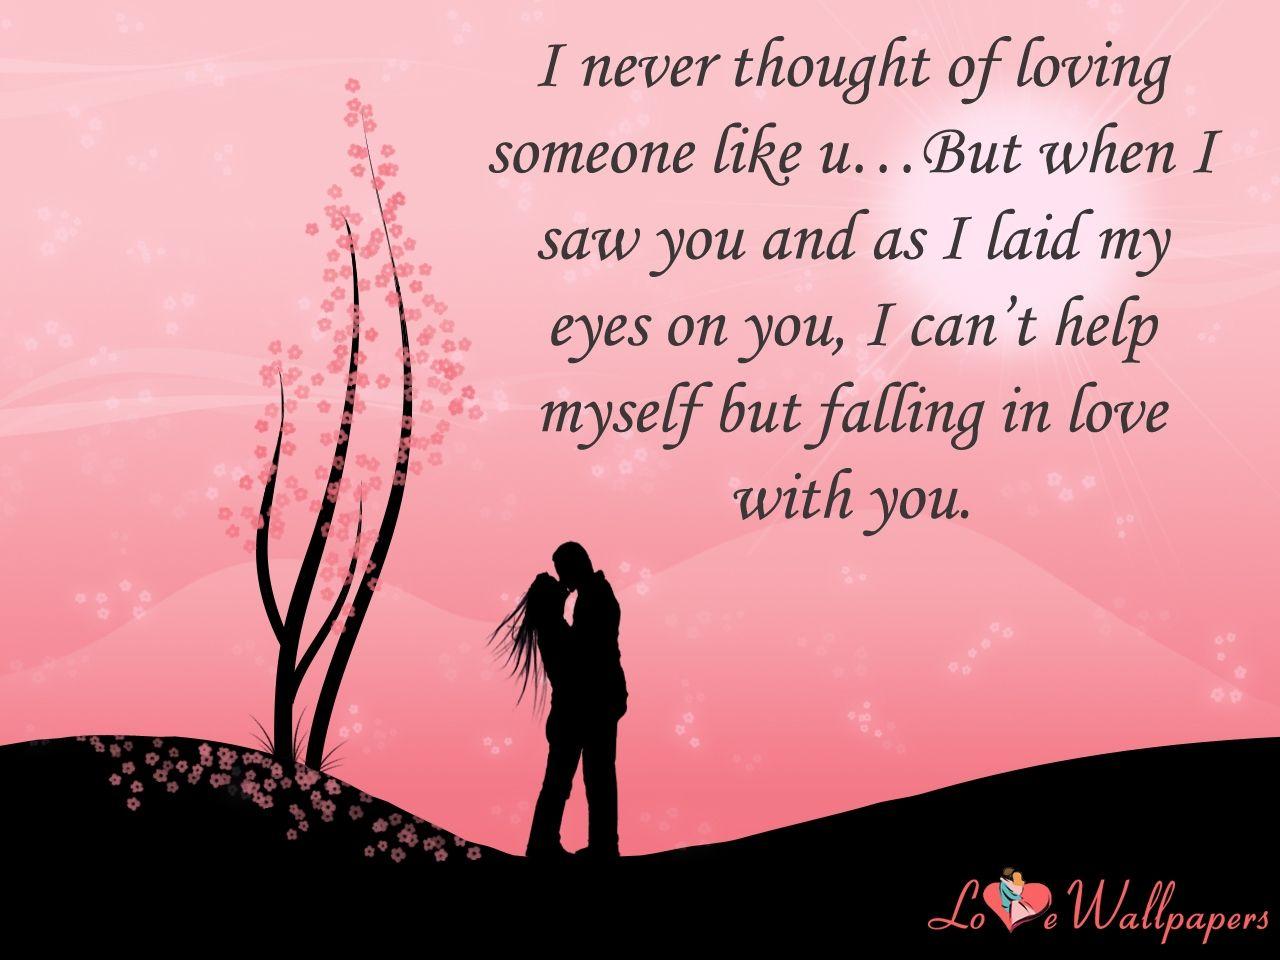 Best image of love thoughts download HD